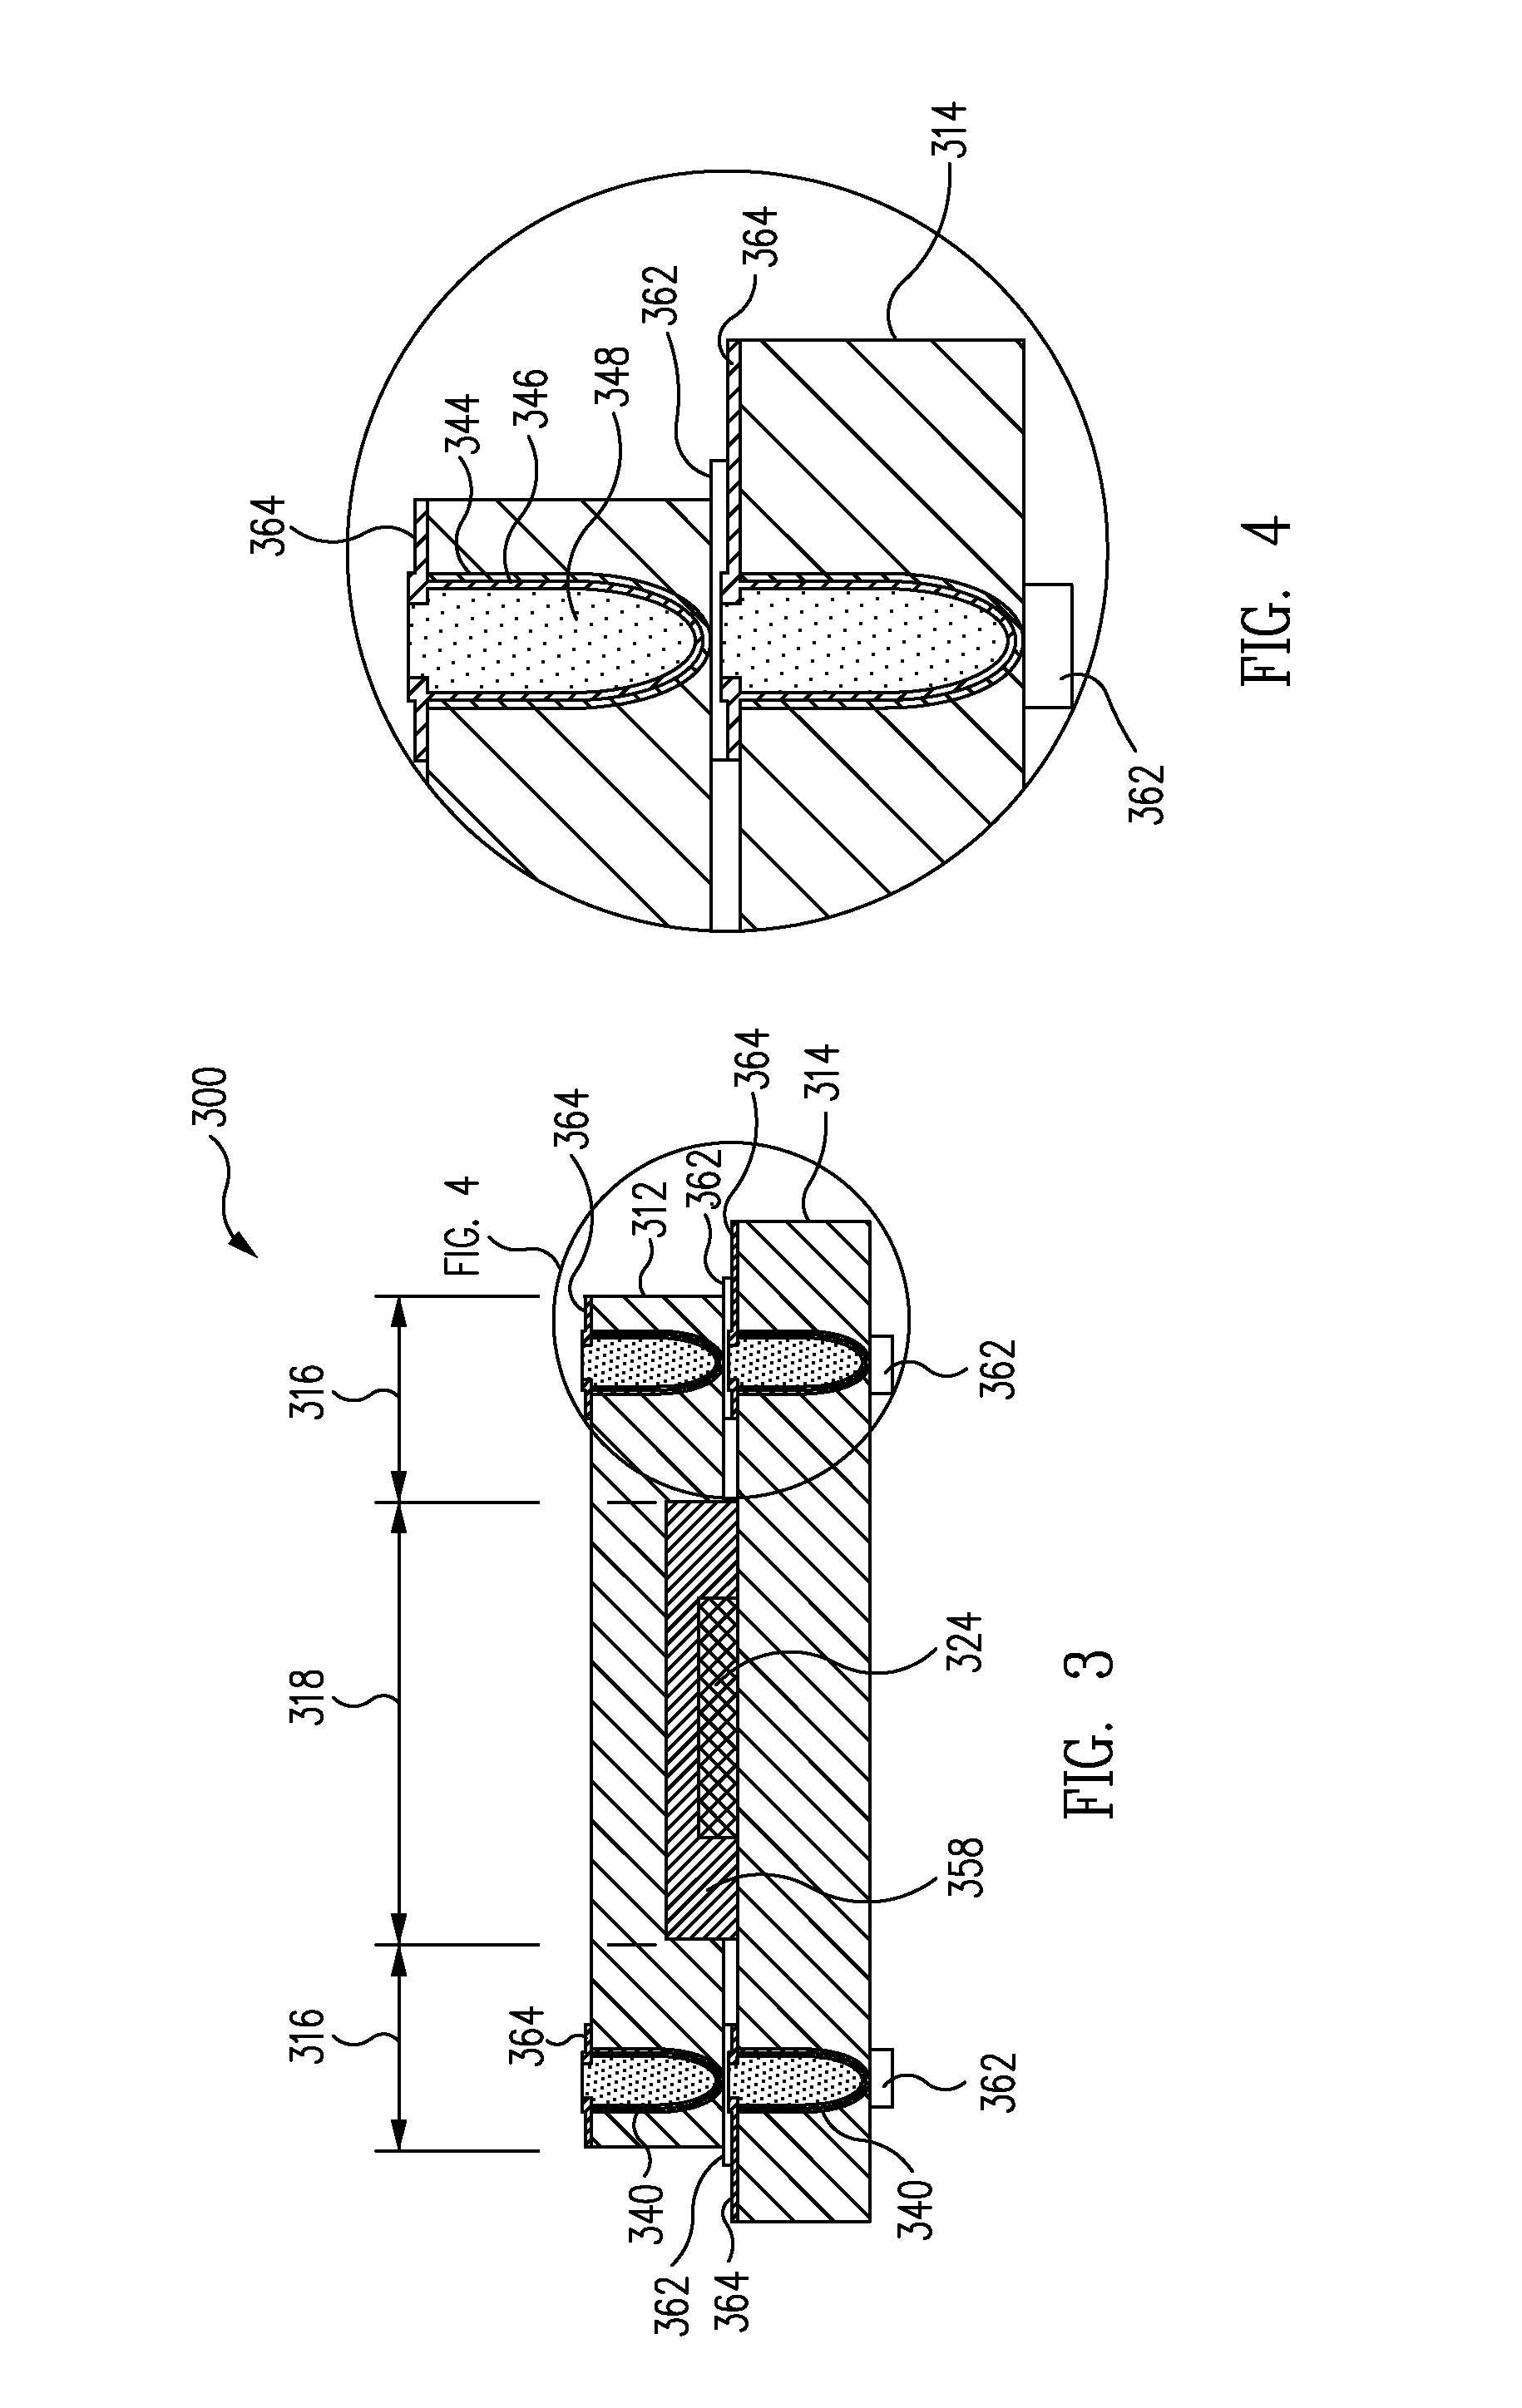 Making electrical components in handle wafers of integrated circuit packages